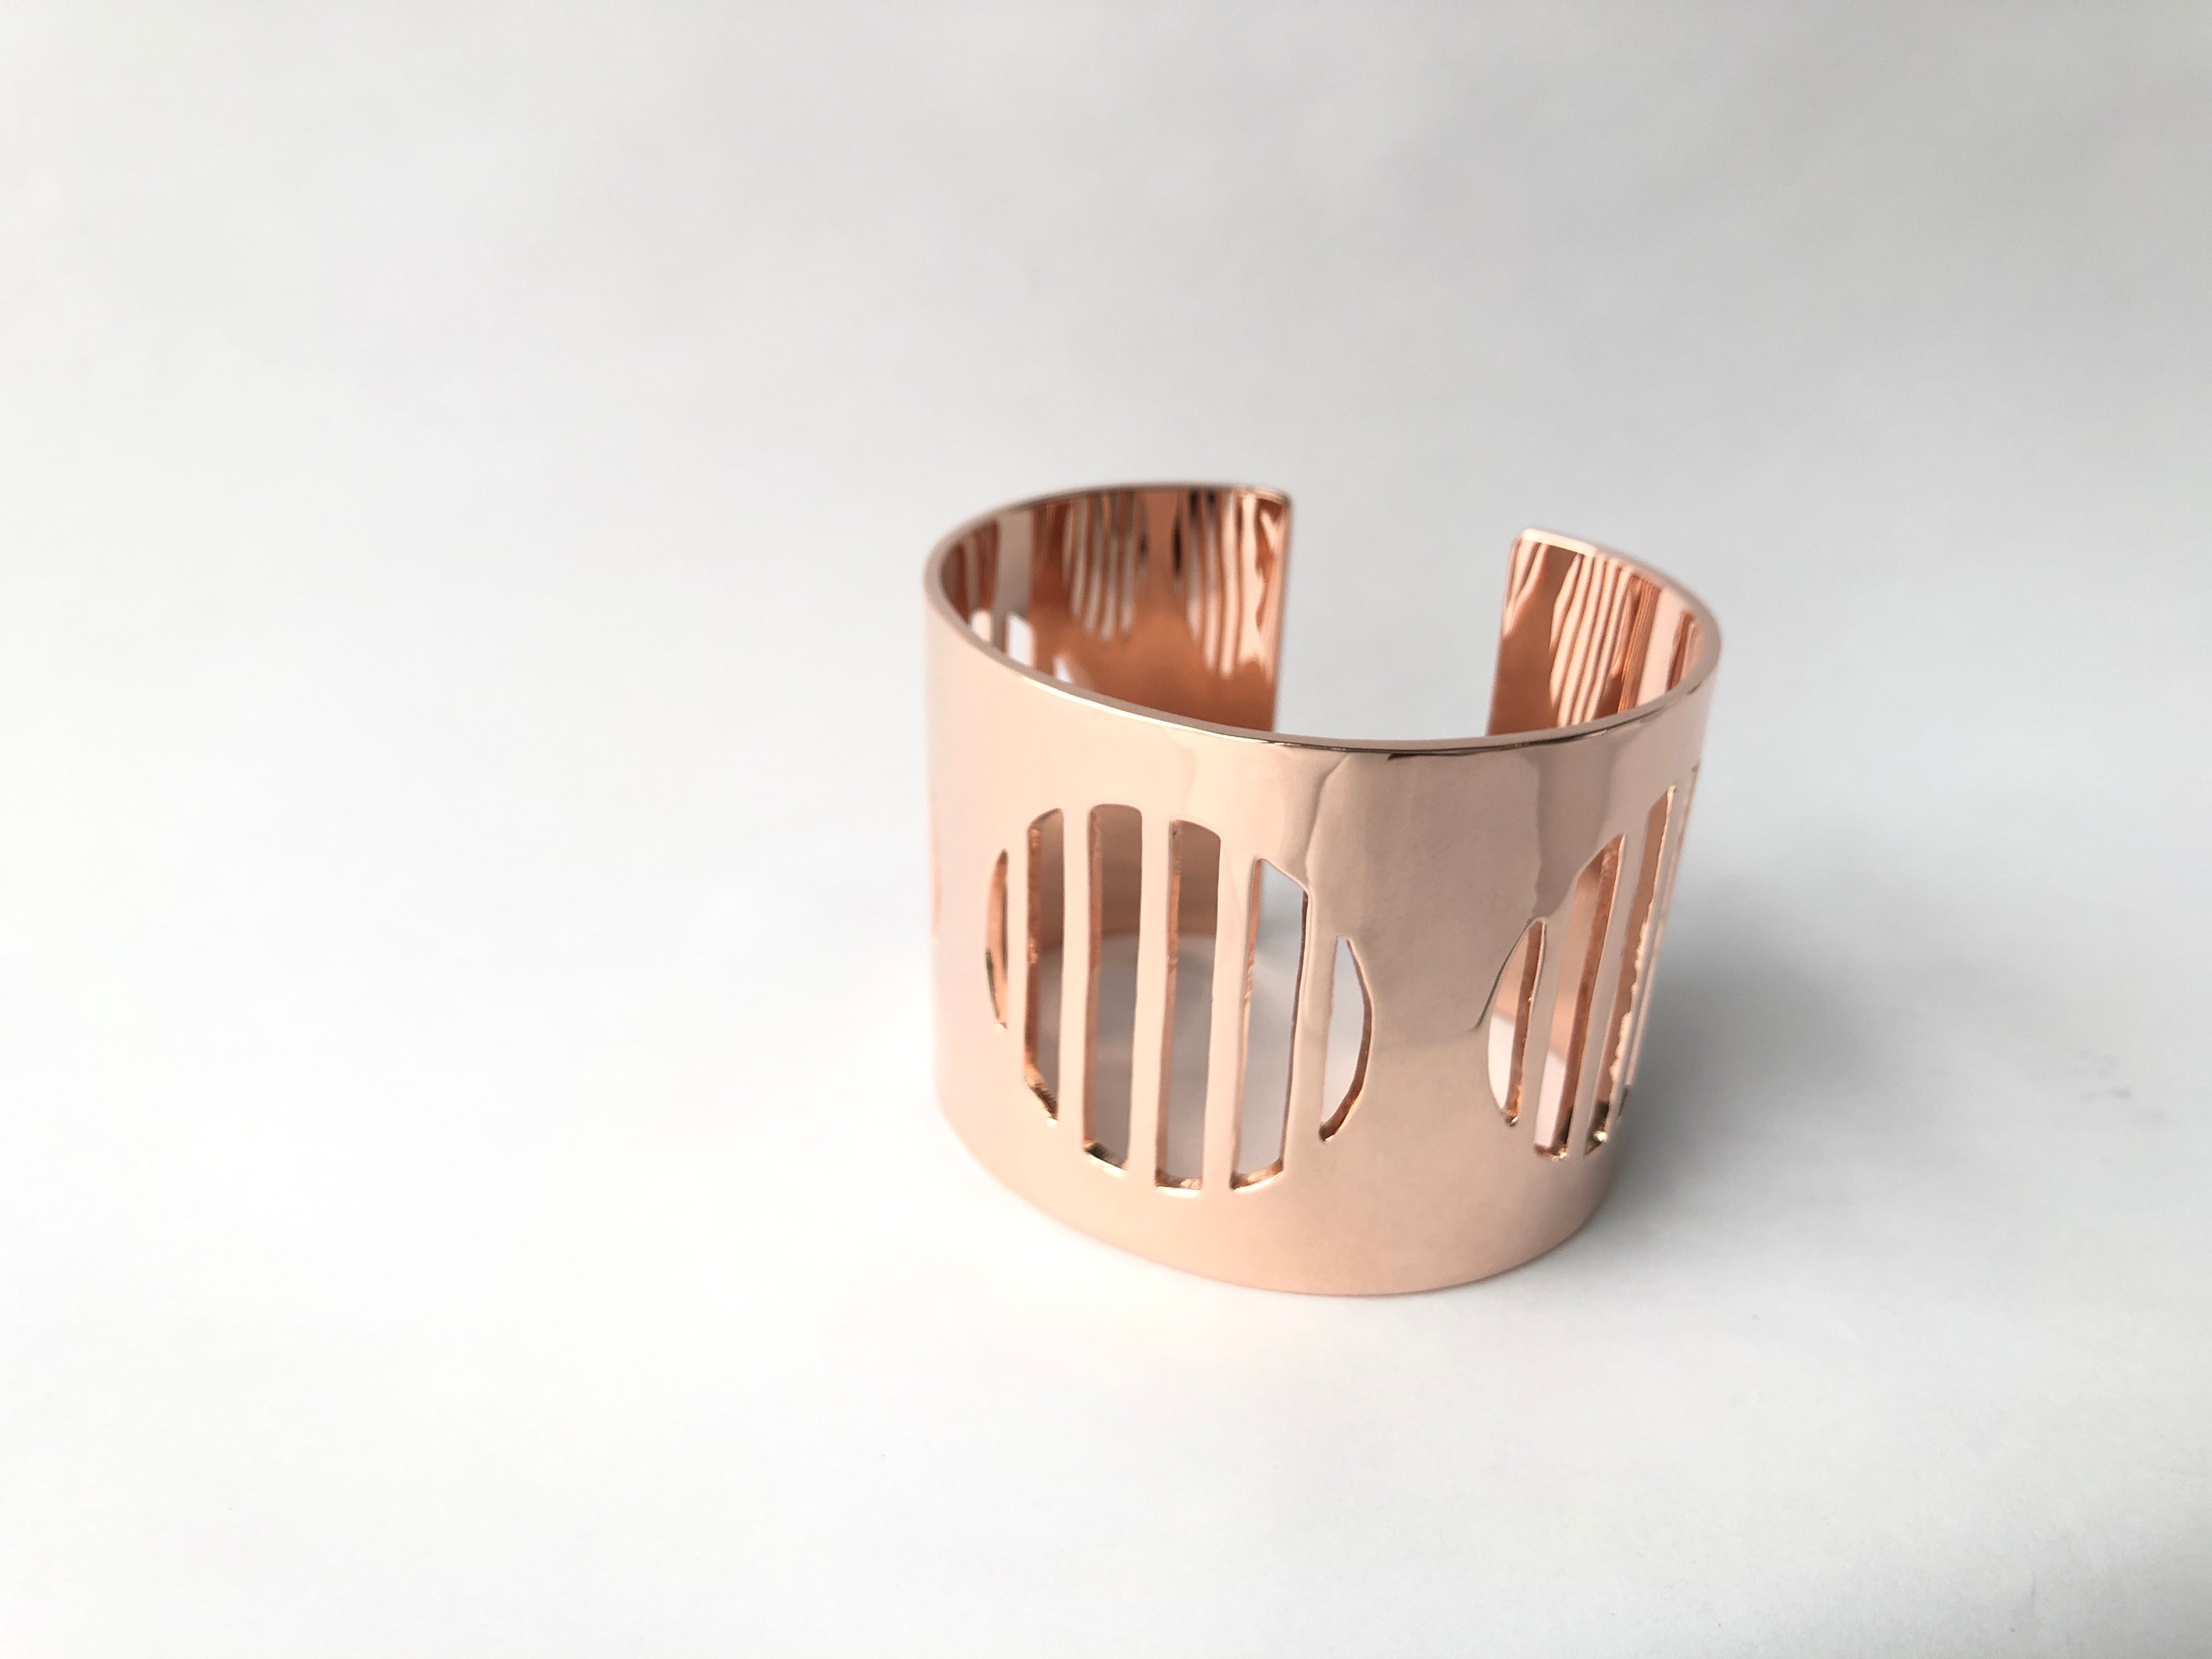 rosegold sustainable jewellery recycled rings cuffs bracelets ethical accessories women